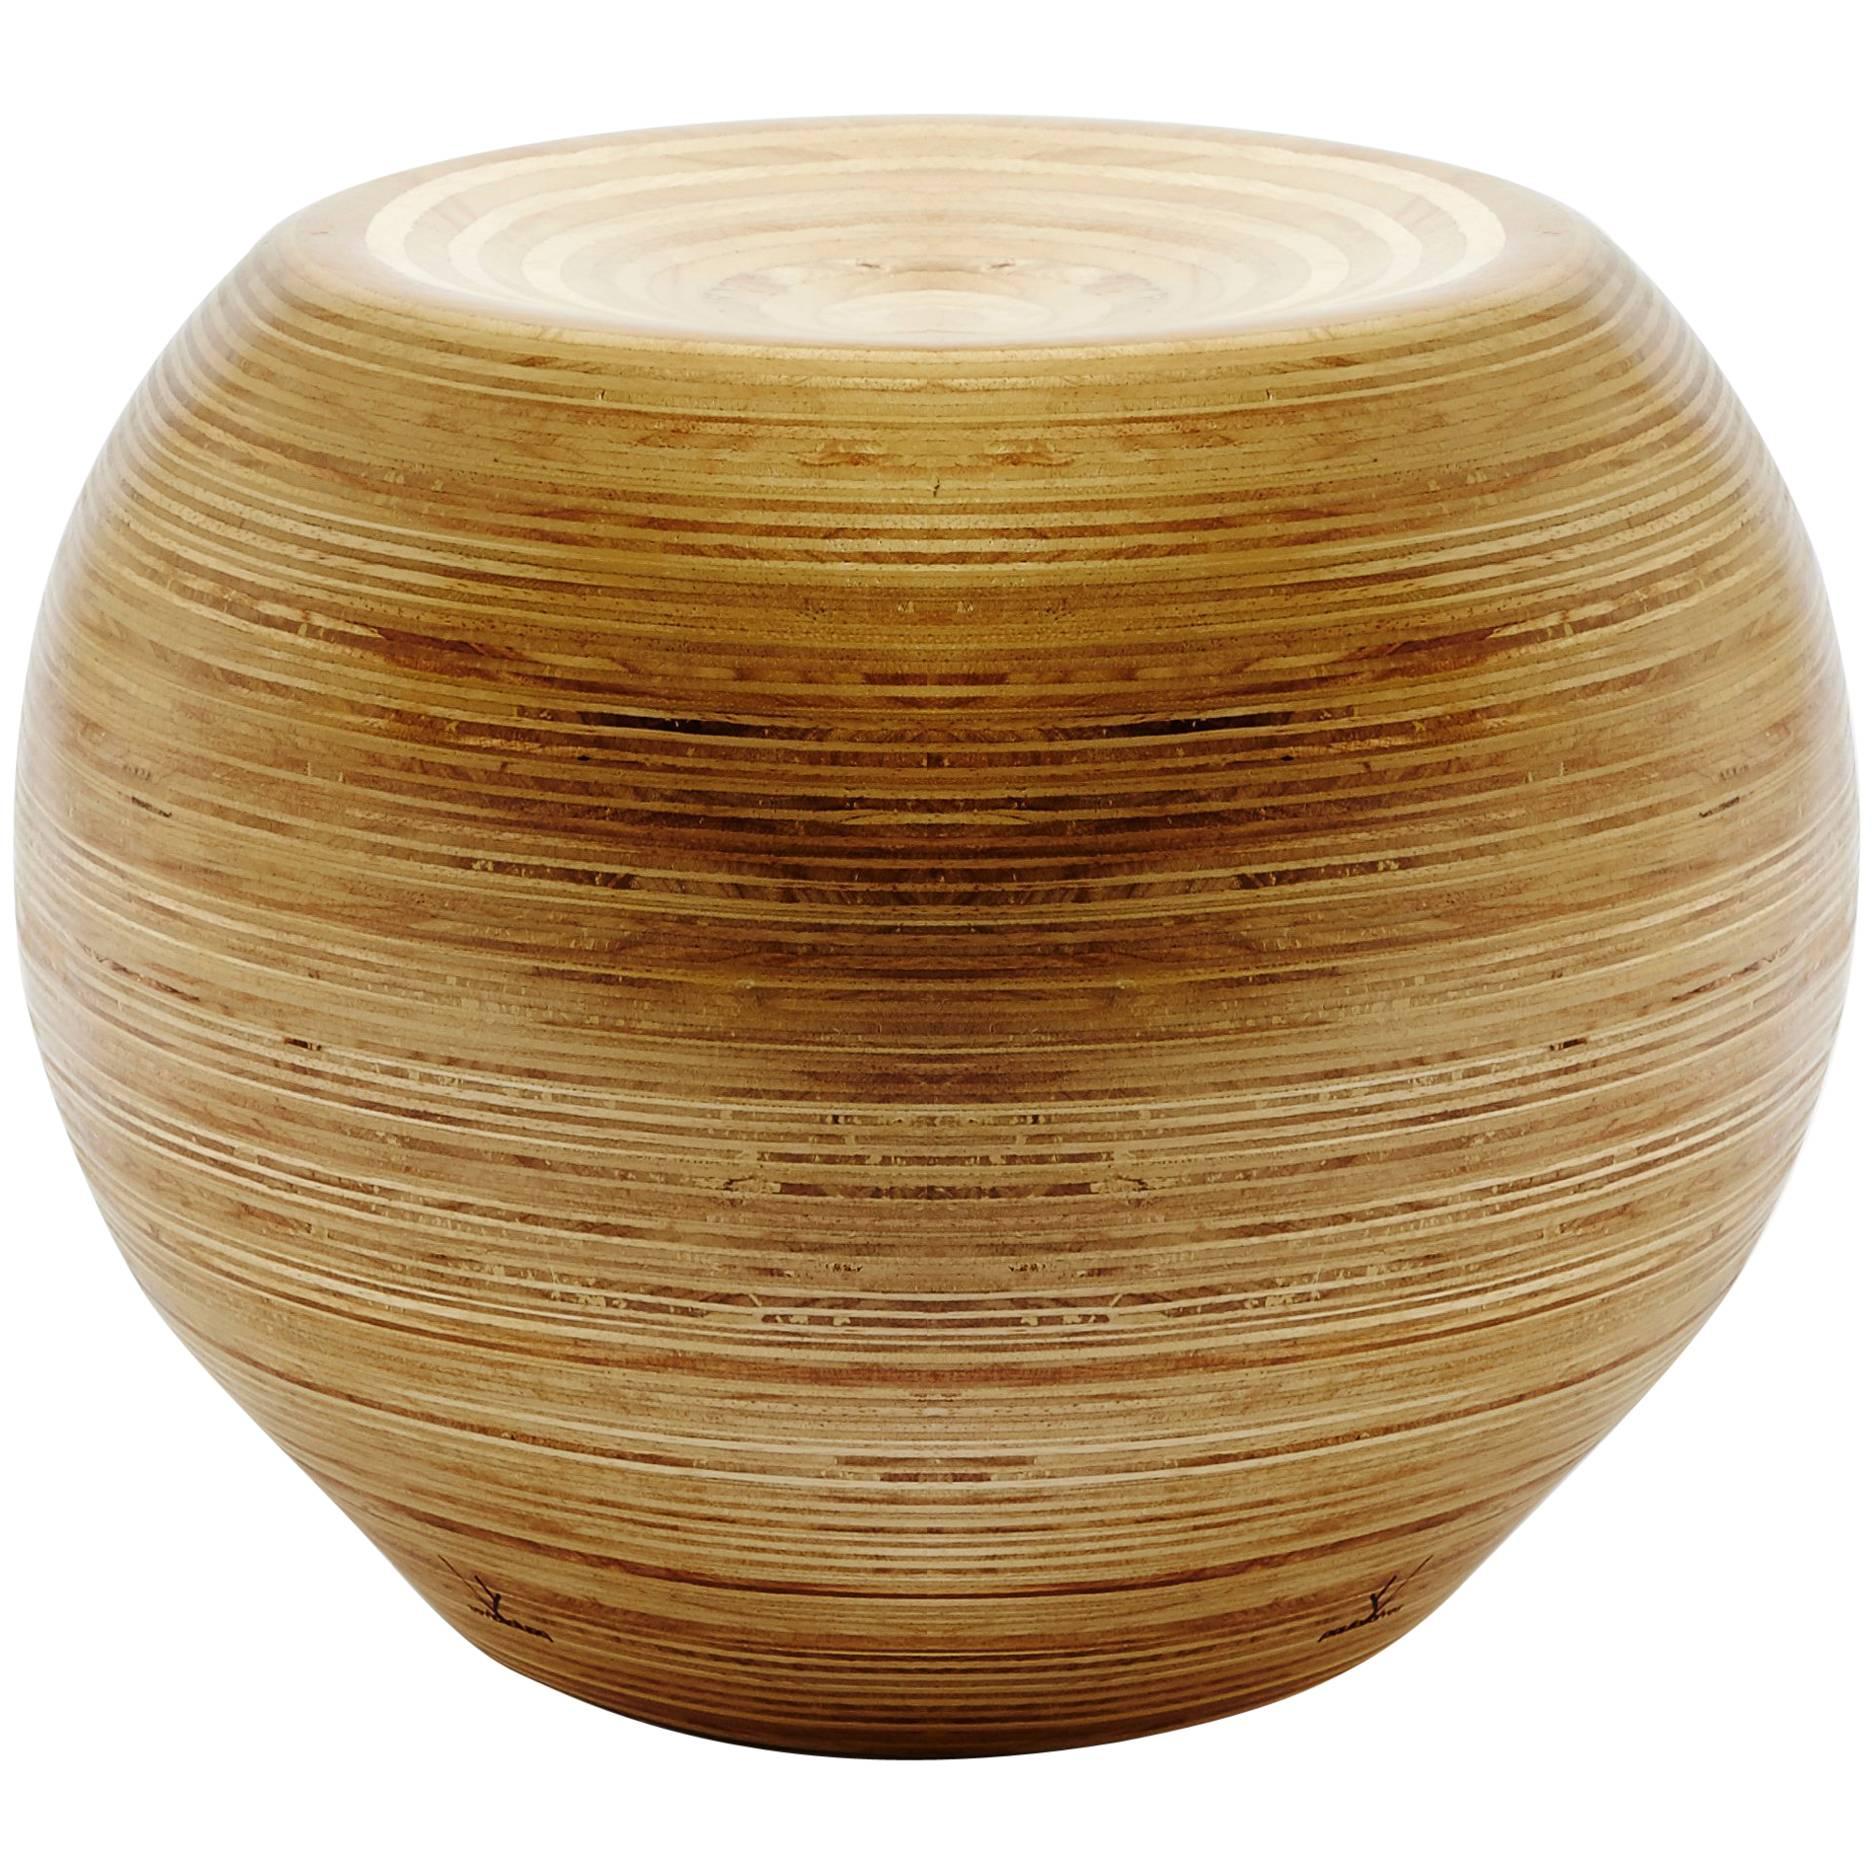 Bola Pouf in Sumaúma Plywood by Paulo Alves, Handcrafted in Brazil For Sale